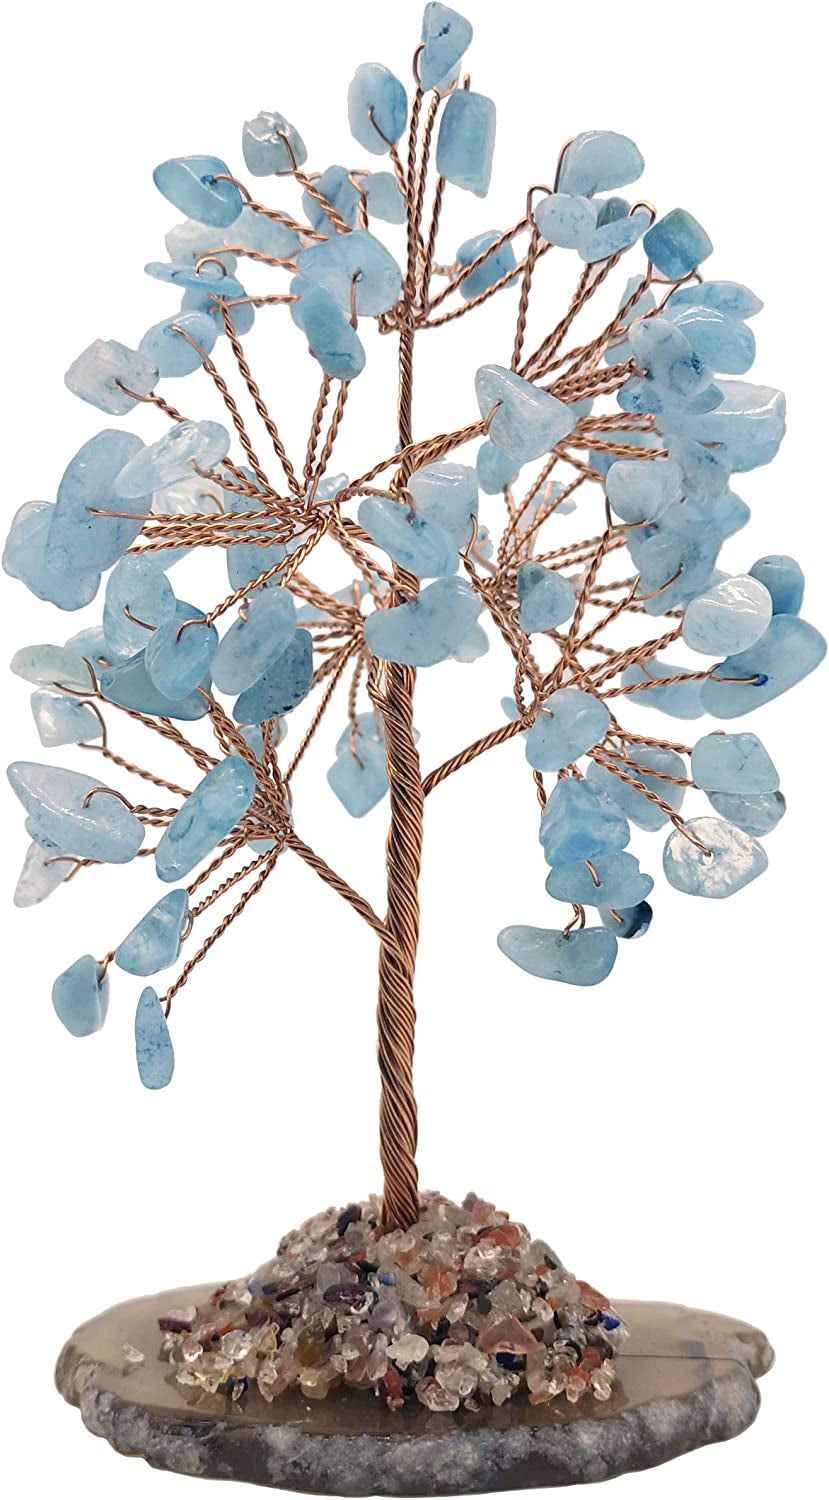 Healing Crystals Tree / Bonsai Tree for Home Decor, Room Decor and Office Desk, Spiritual Gifts for Energy Healing, Good Luck Gifts for Wealth & Prosperity, and Decorative Home Accessories